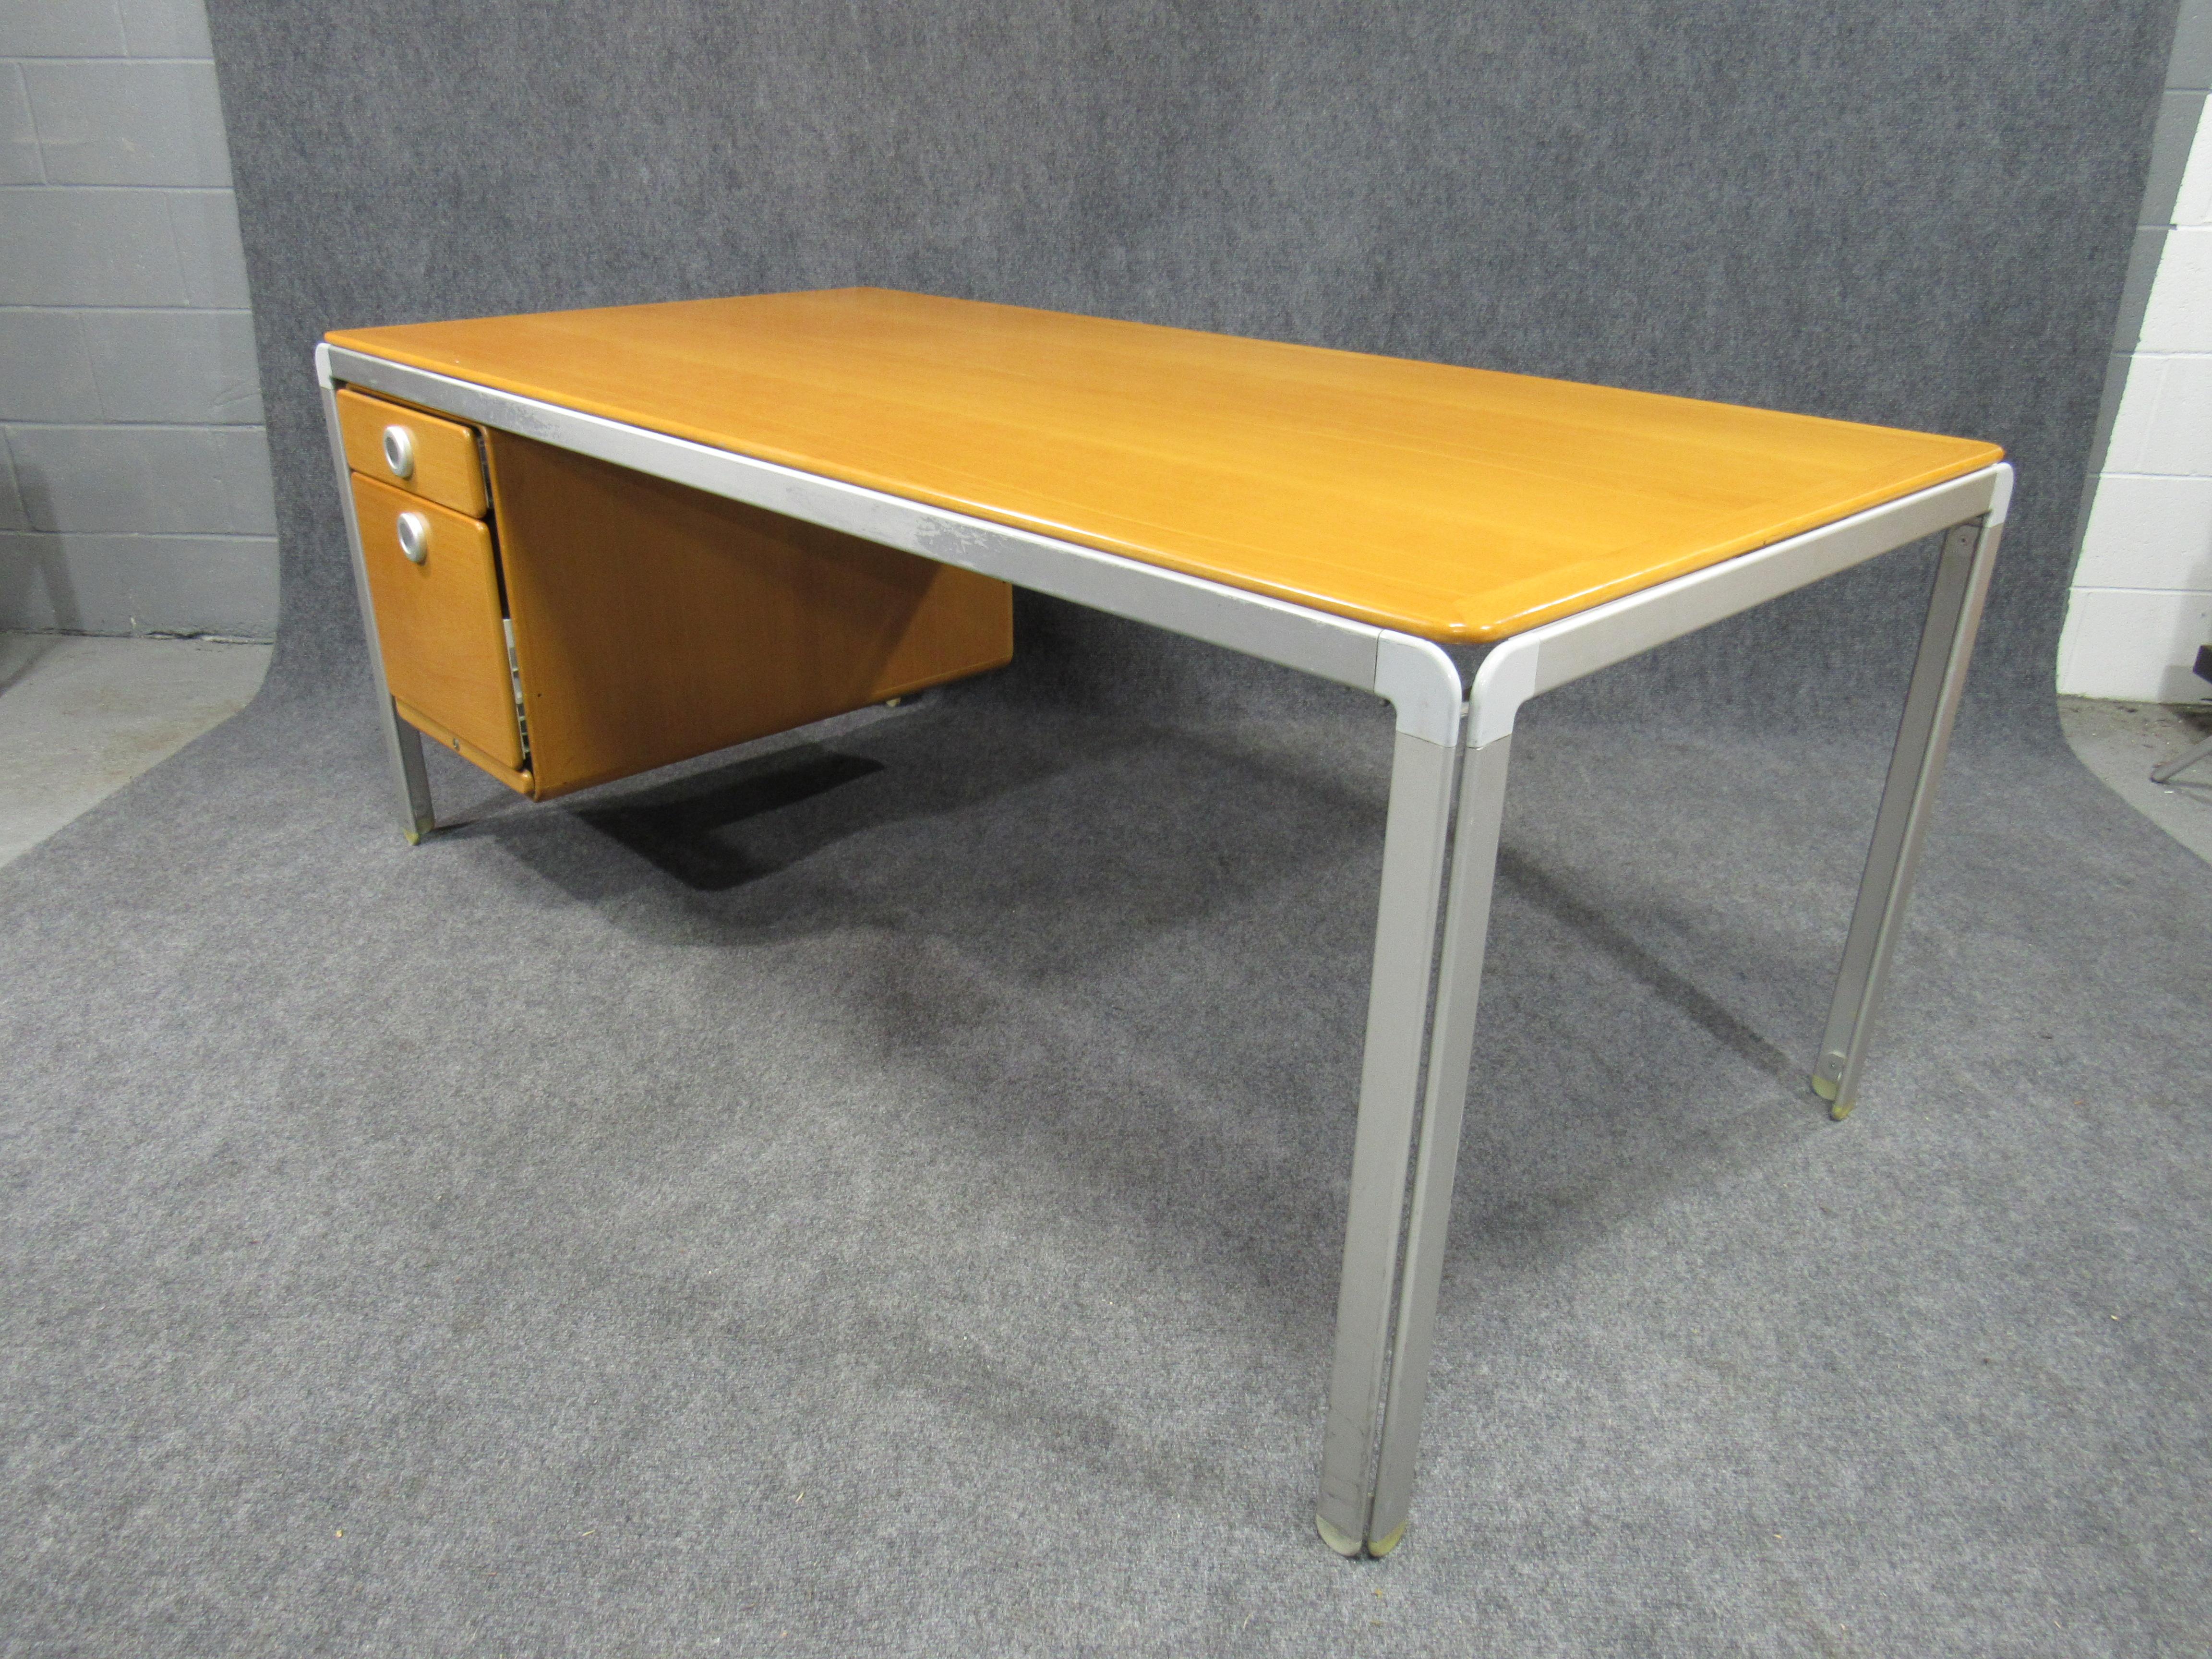 Danish architect Arne Jacobsen designed this modern writing desk in conjunction with his architectural design for the Danish National Bank, which was completed in 1970. The desk, made of an aluminum frame, linoleum top and mahogany drawer modules,